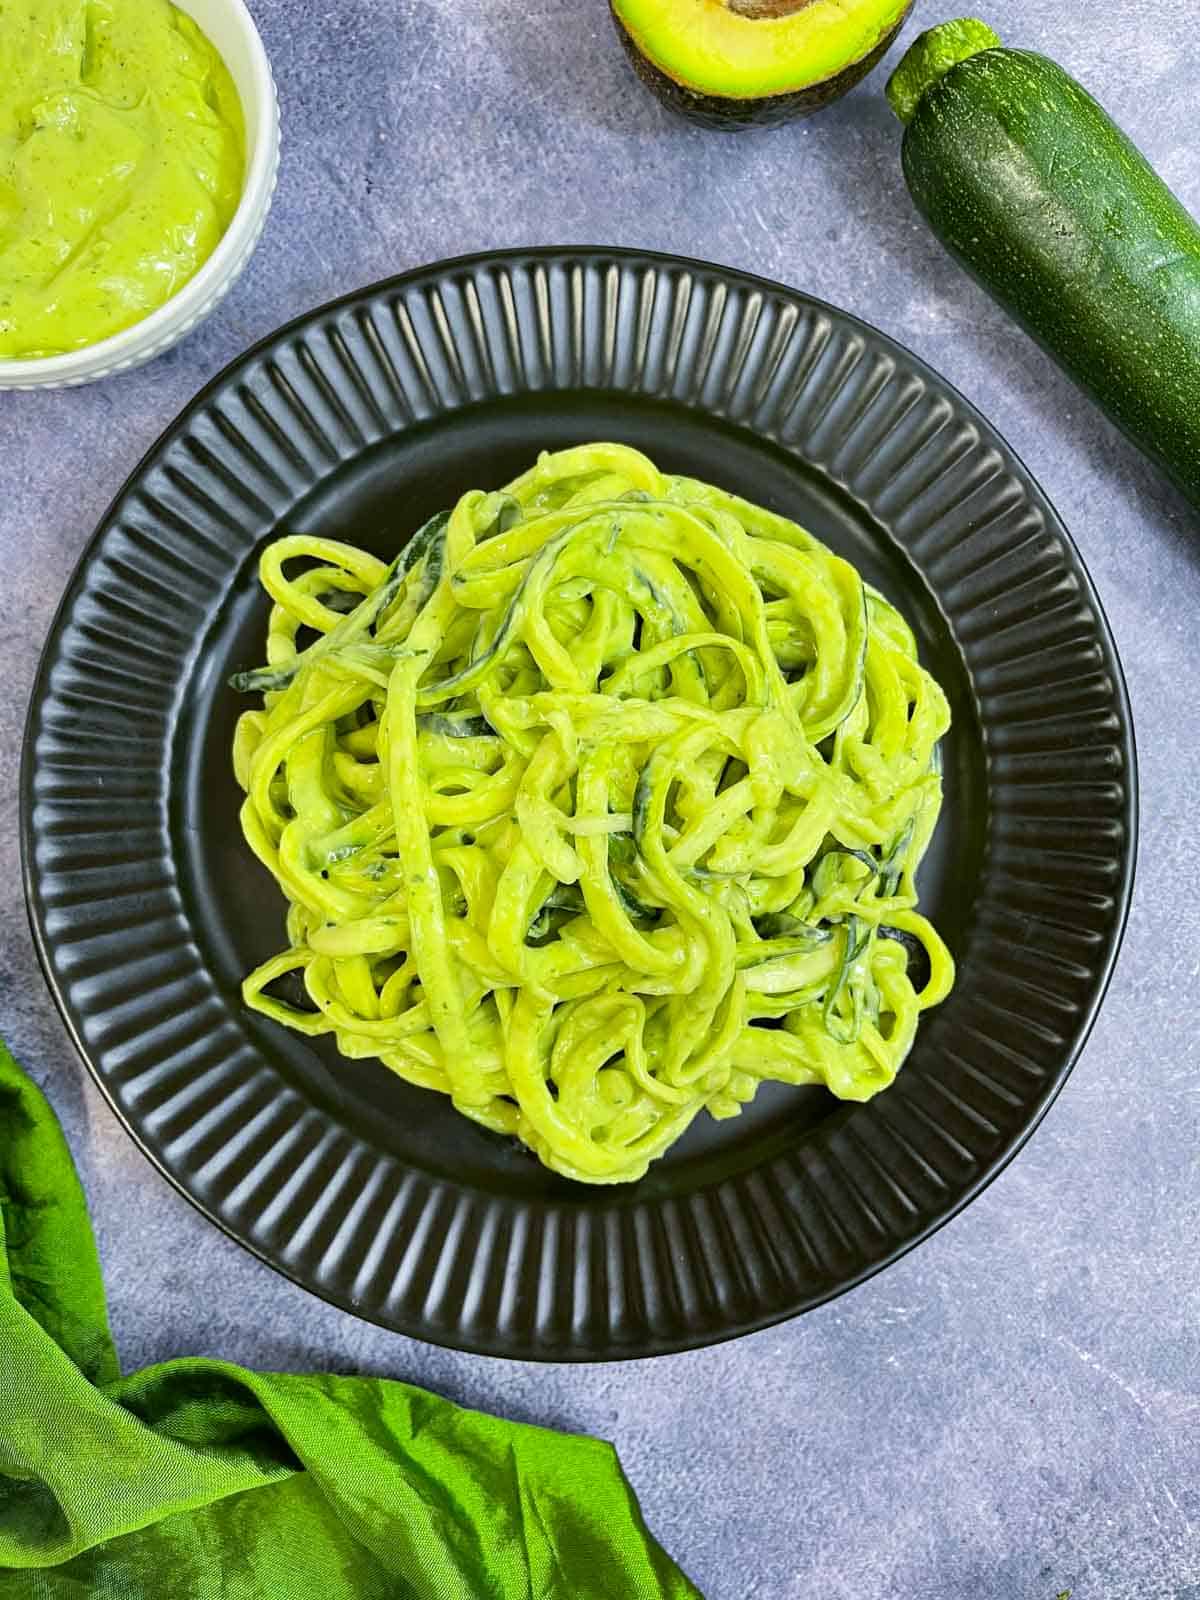 Zucchini Pasta with avocado sauce served in a black plate with cut avocado, zucchini and sauce in the side